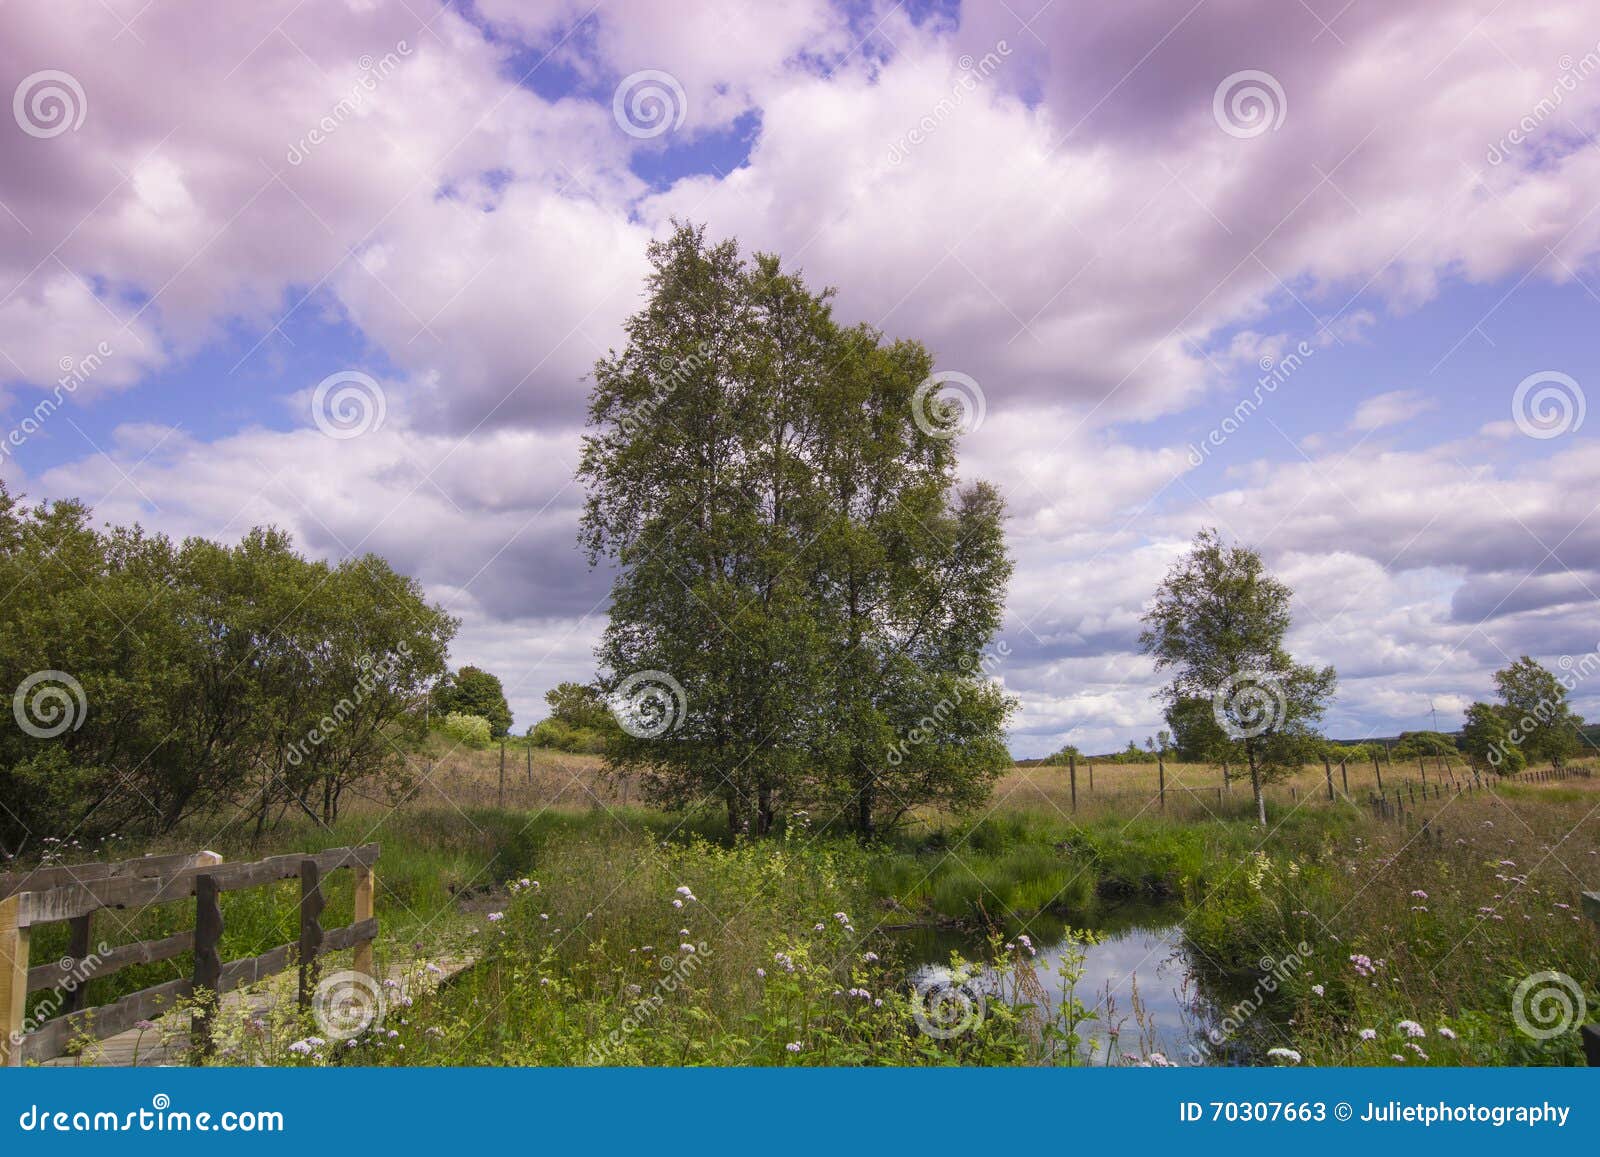 Beautiful Rural Landscape In Summer Stock Image Image Of Tree Green